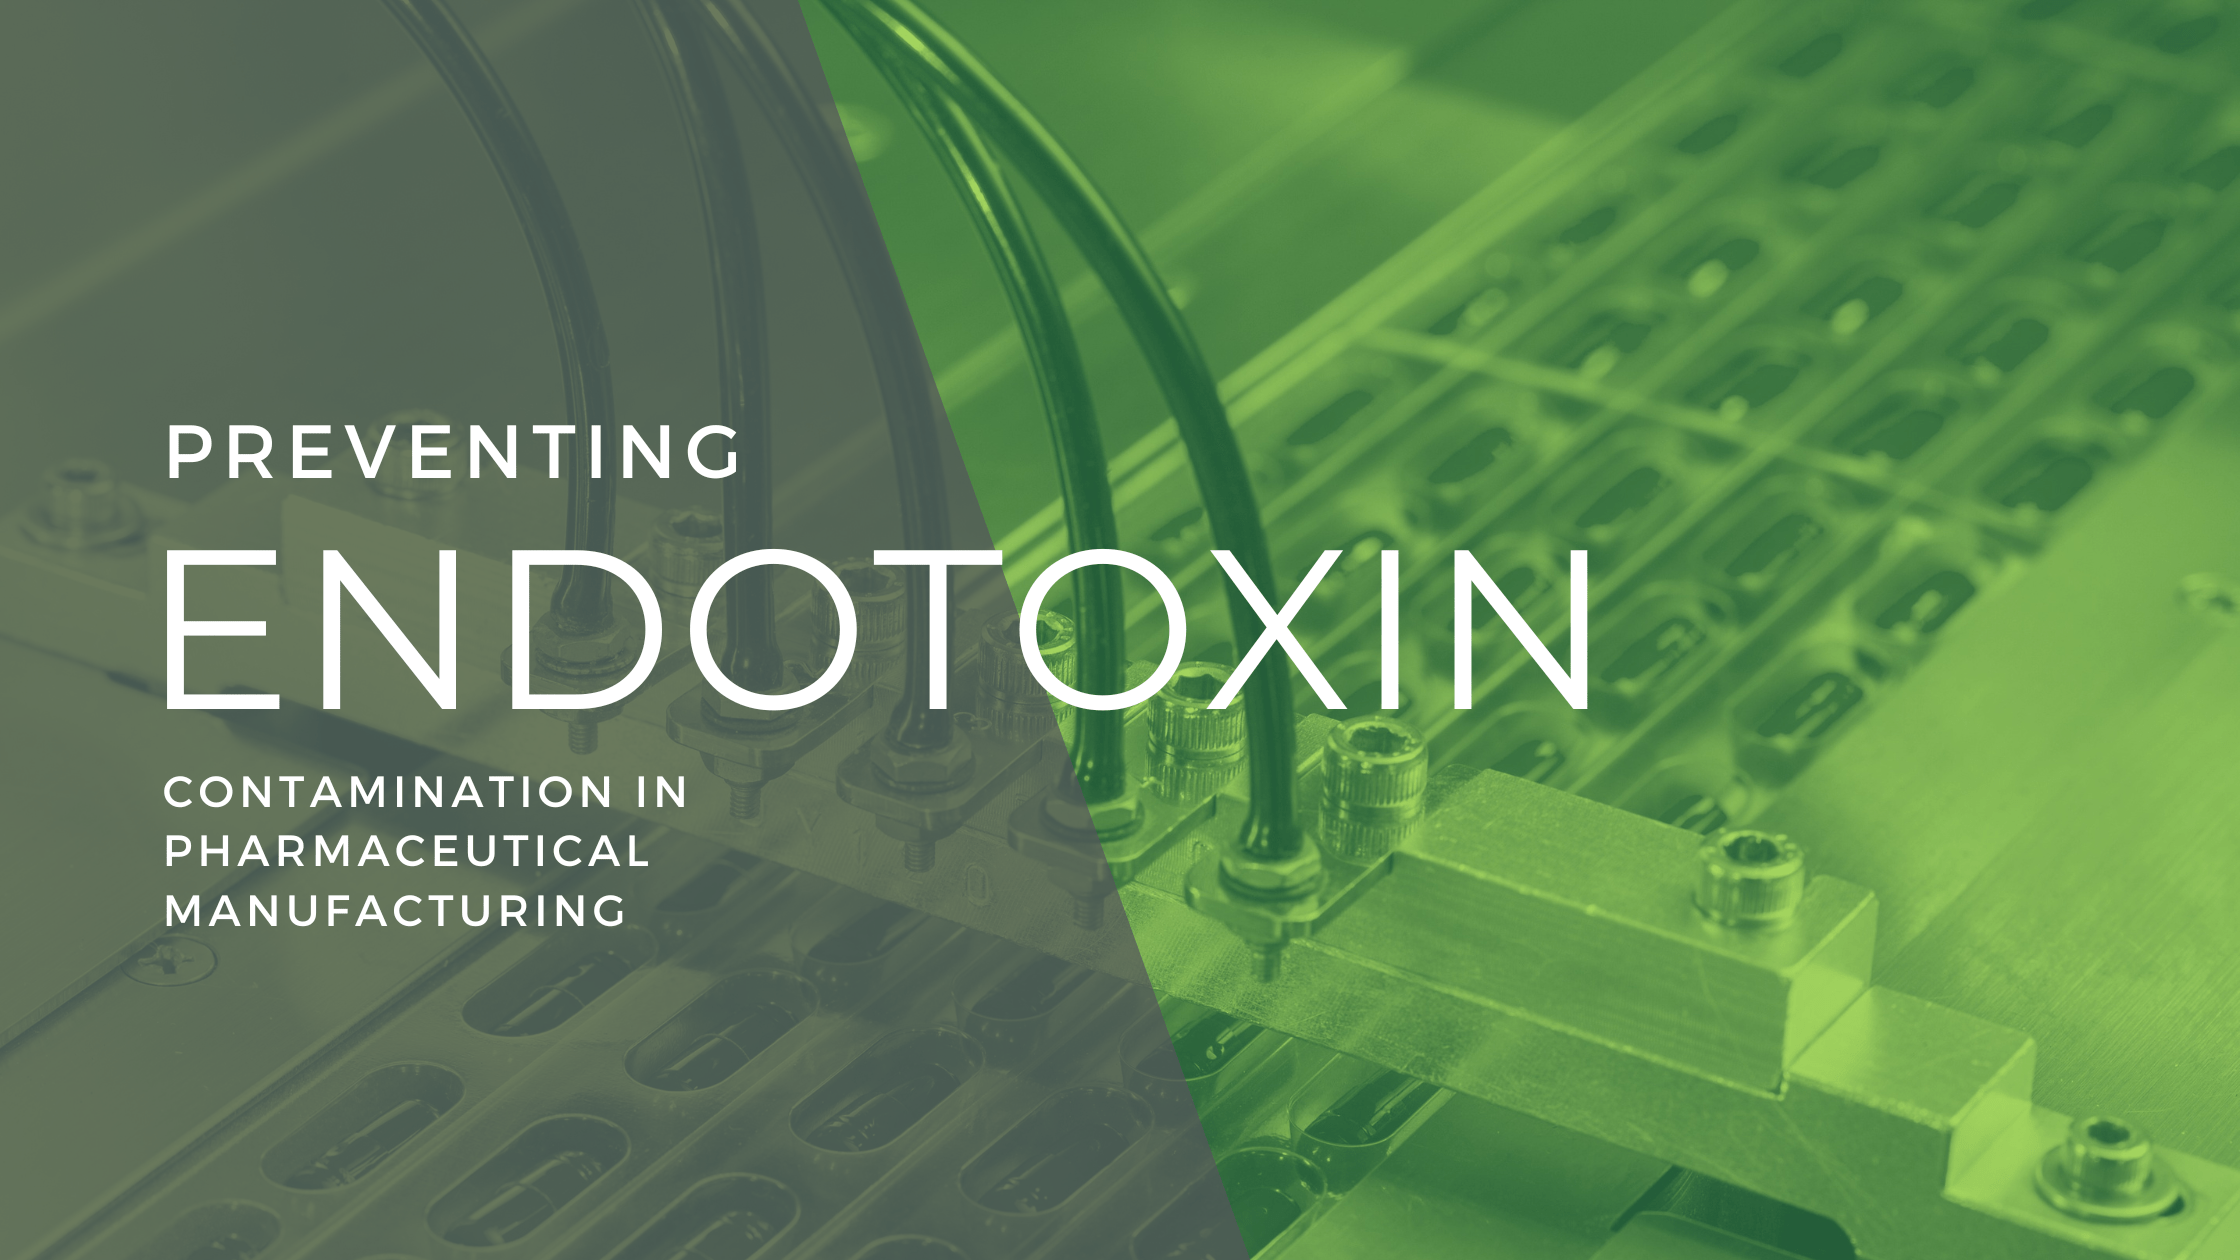 How to Prevent Endotoxin Contamination in Sterile Pharmaceutical Manufacturing